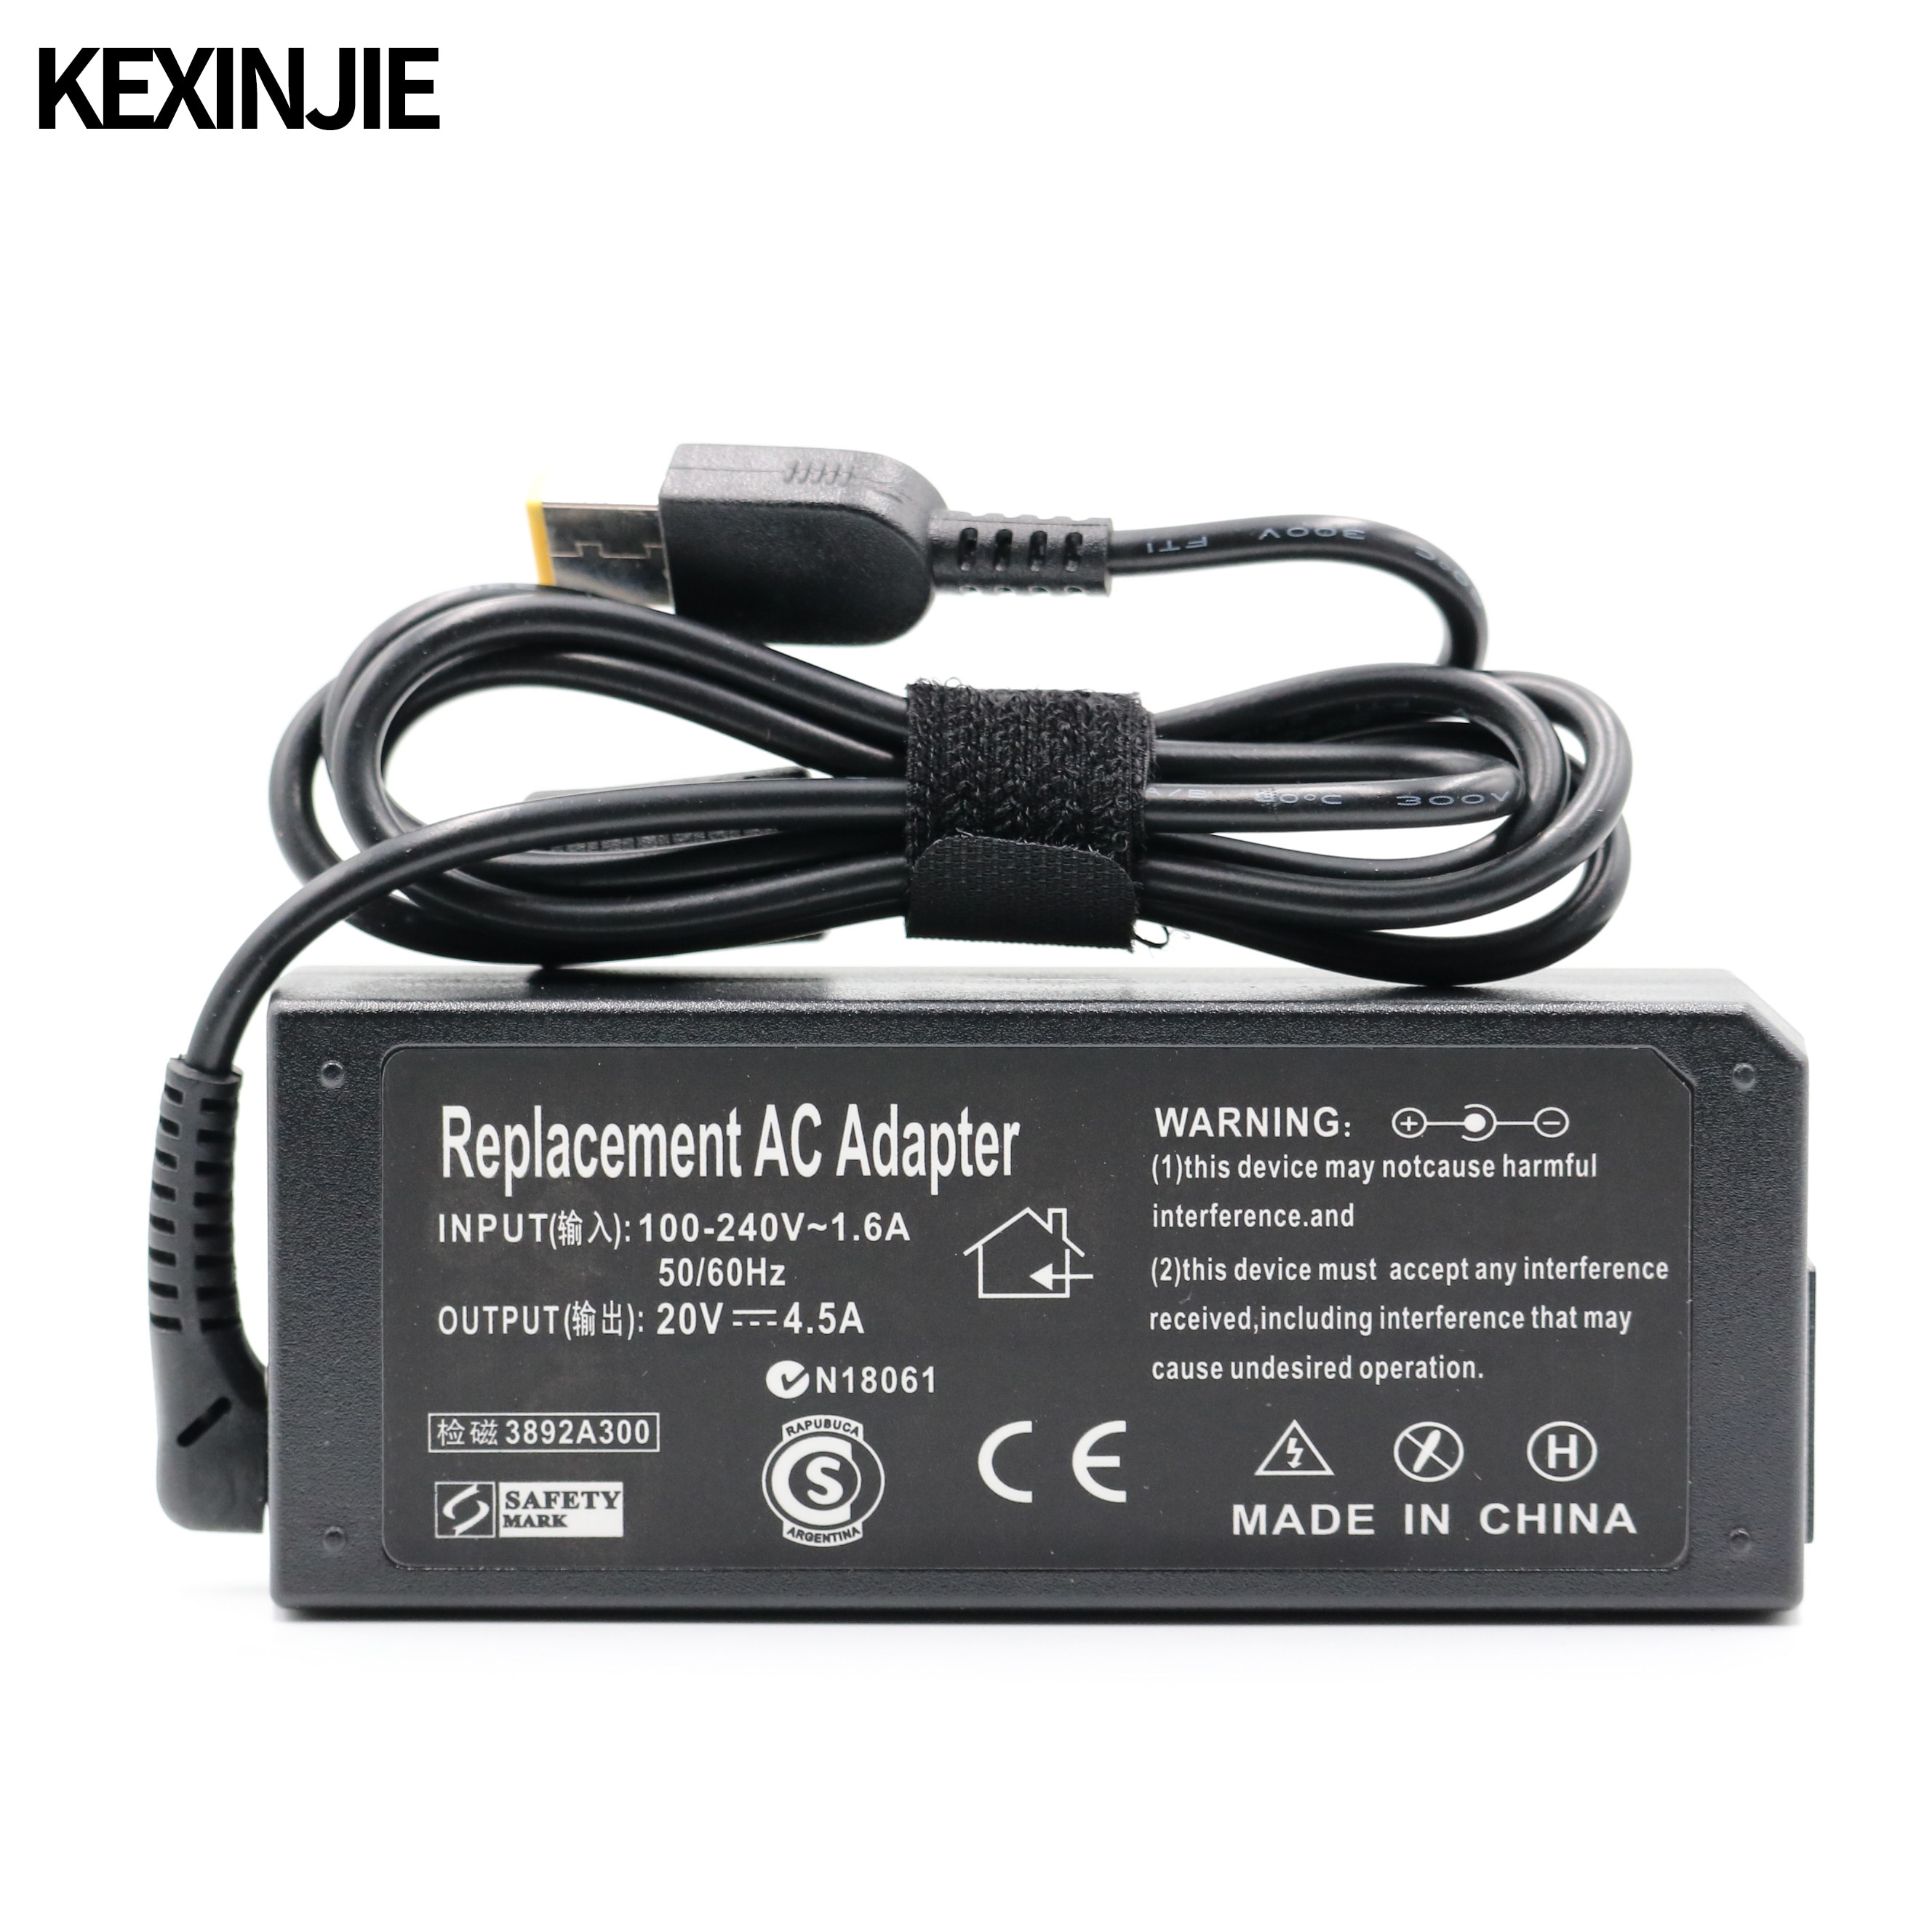 20V 4.5A Ac Adapter Oplader Voor Lenovo Thinkpad X1 Carbon G700 G500 Touch Ul505 Ultrabook Voeding